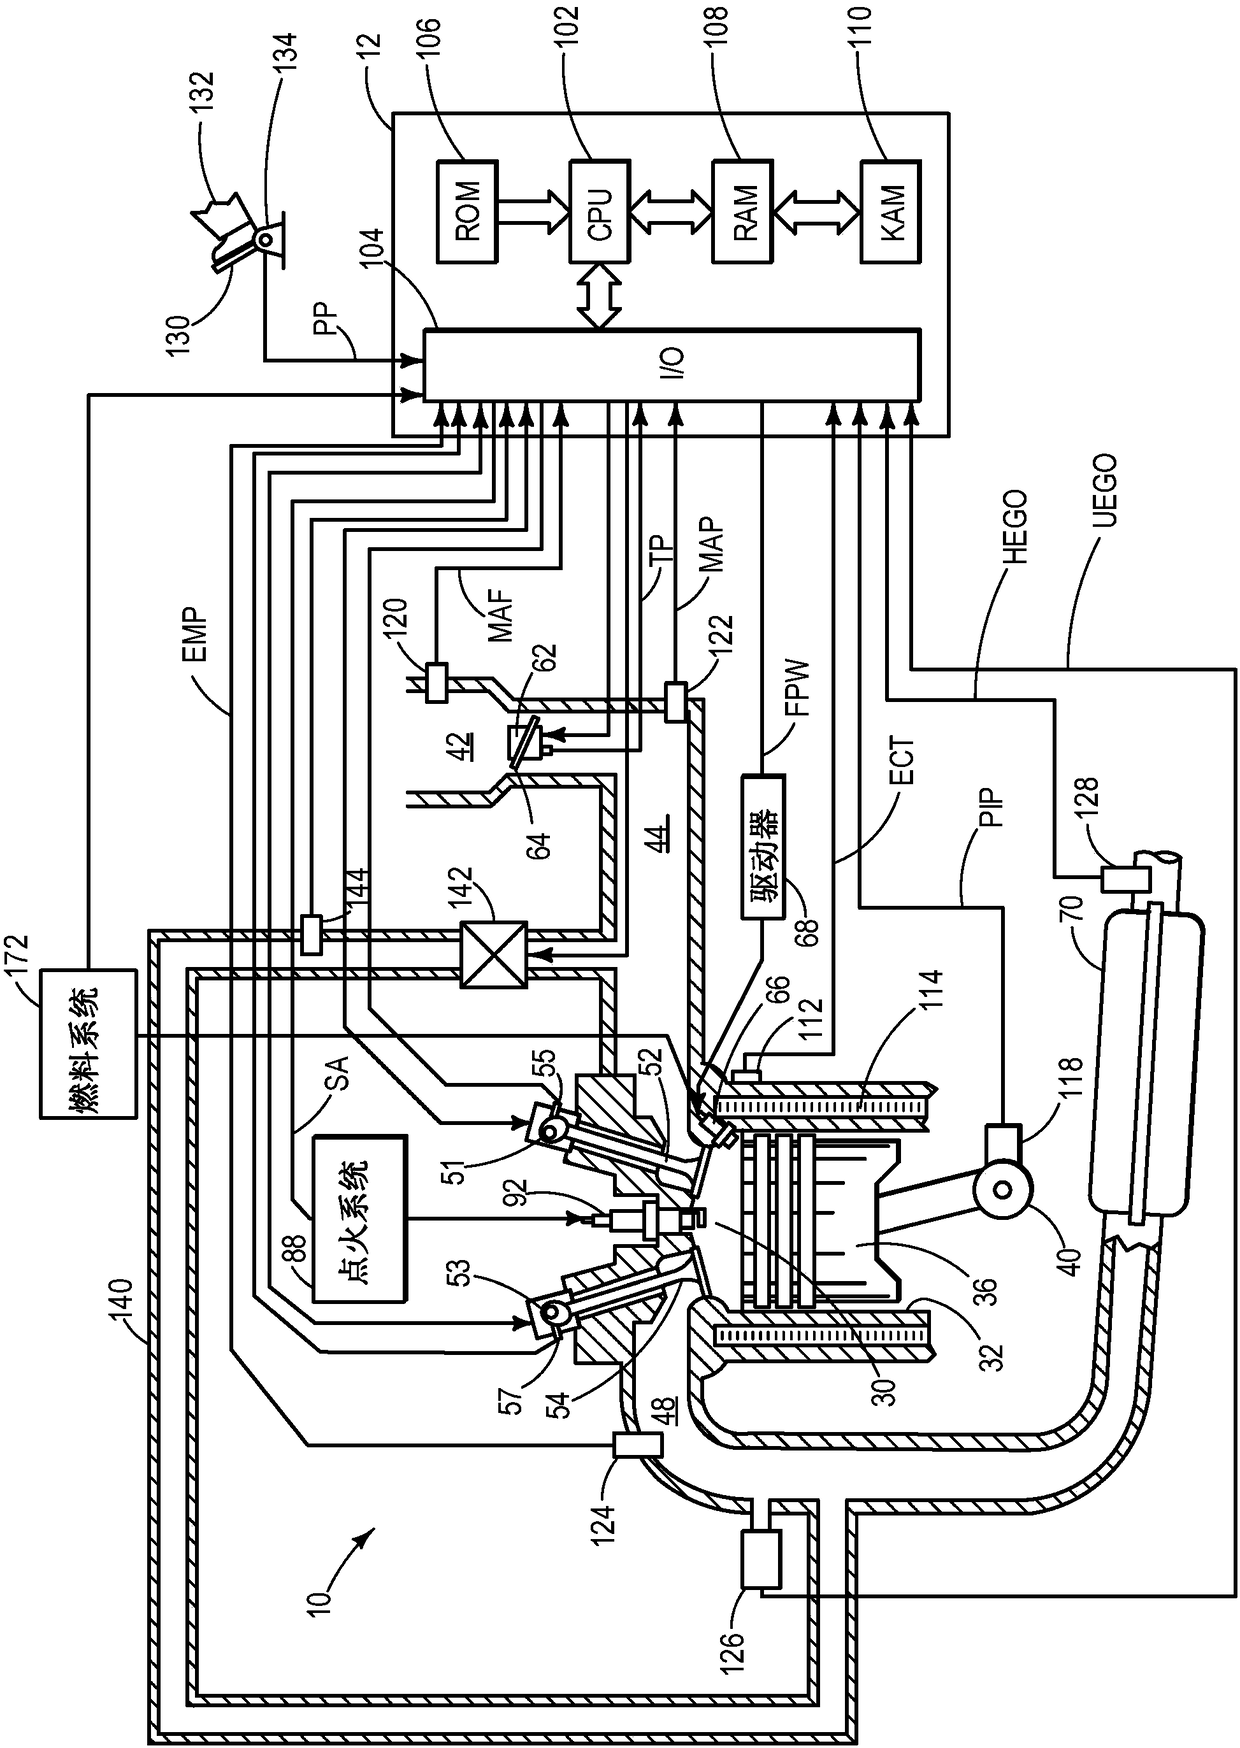 Systems and methods for security breach detection in vehicle communication systems